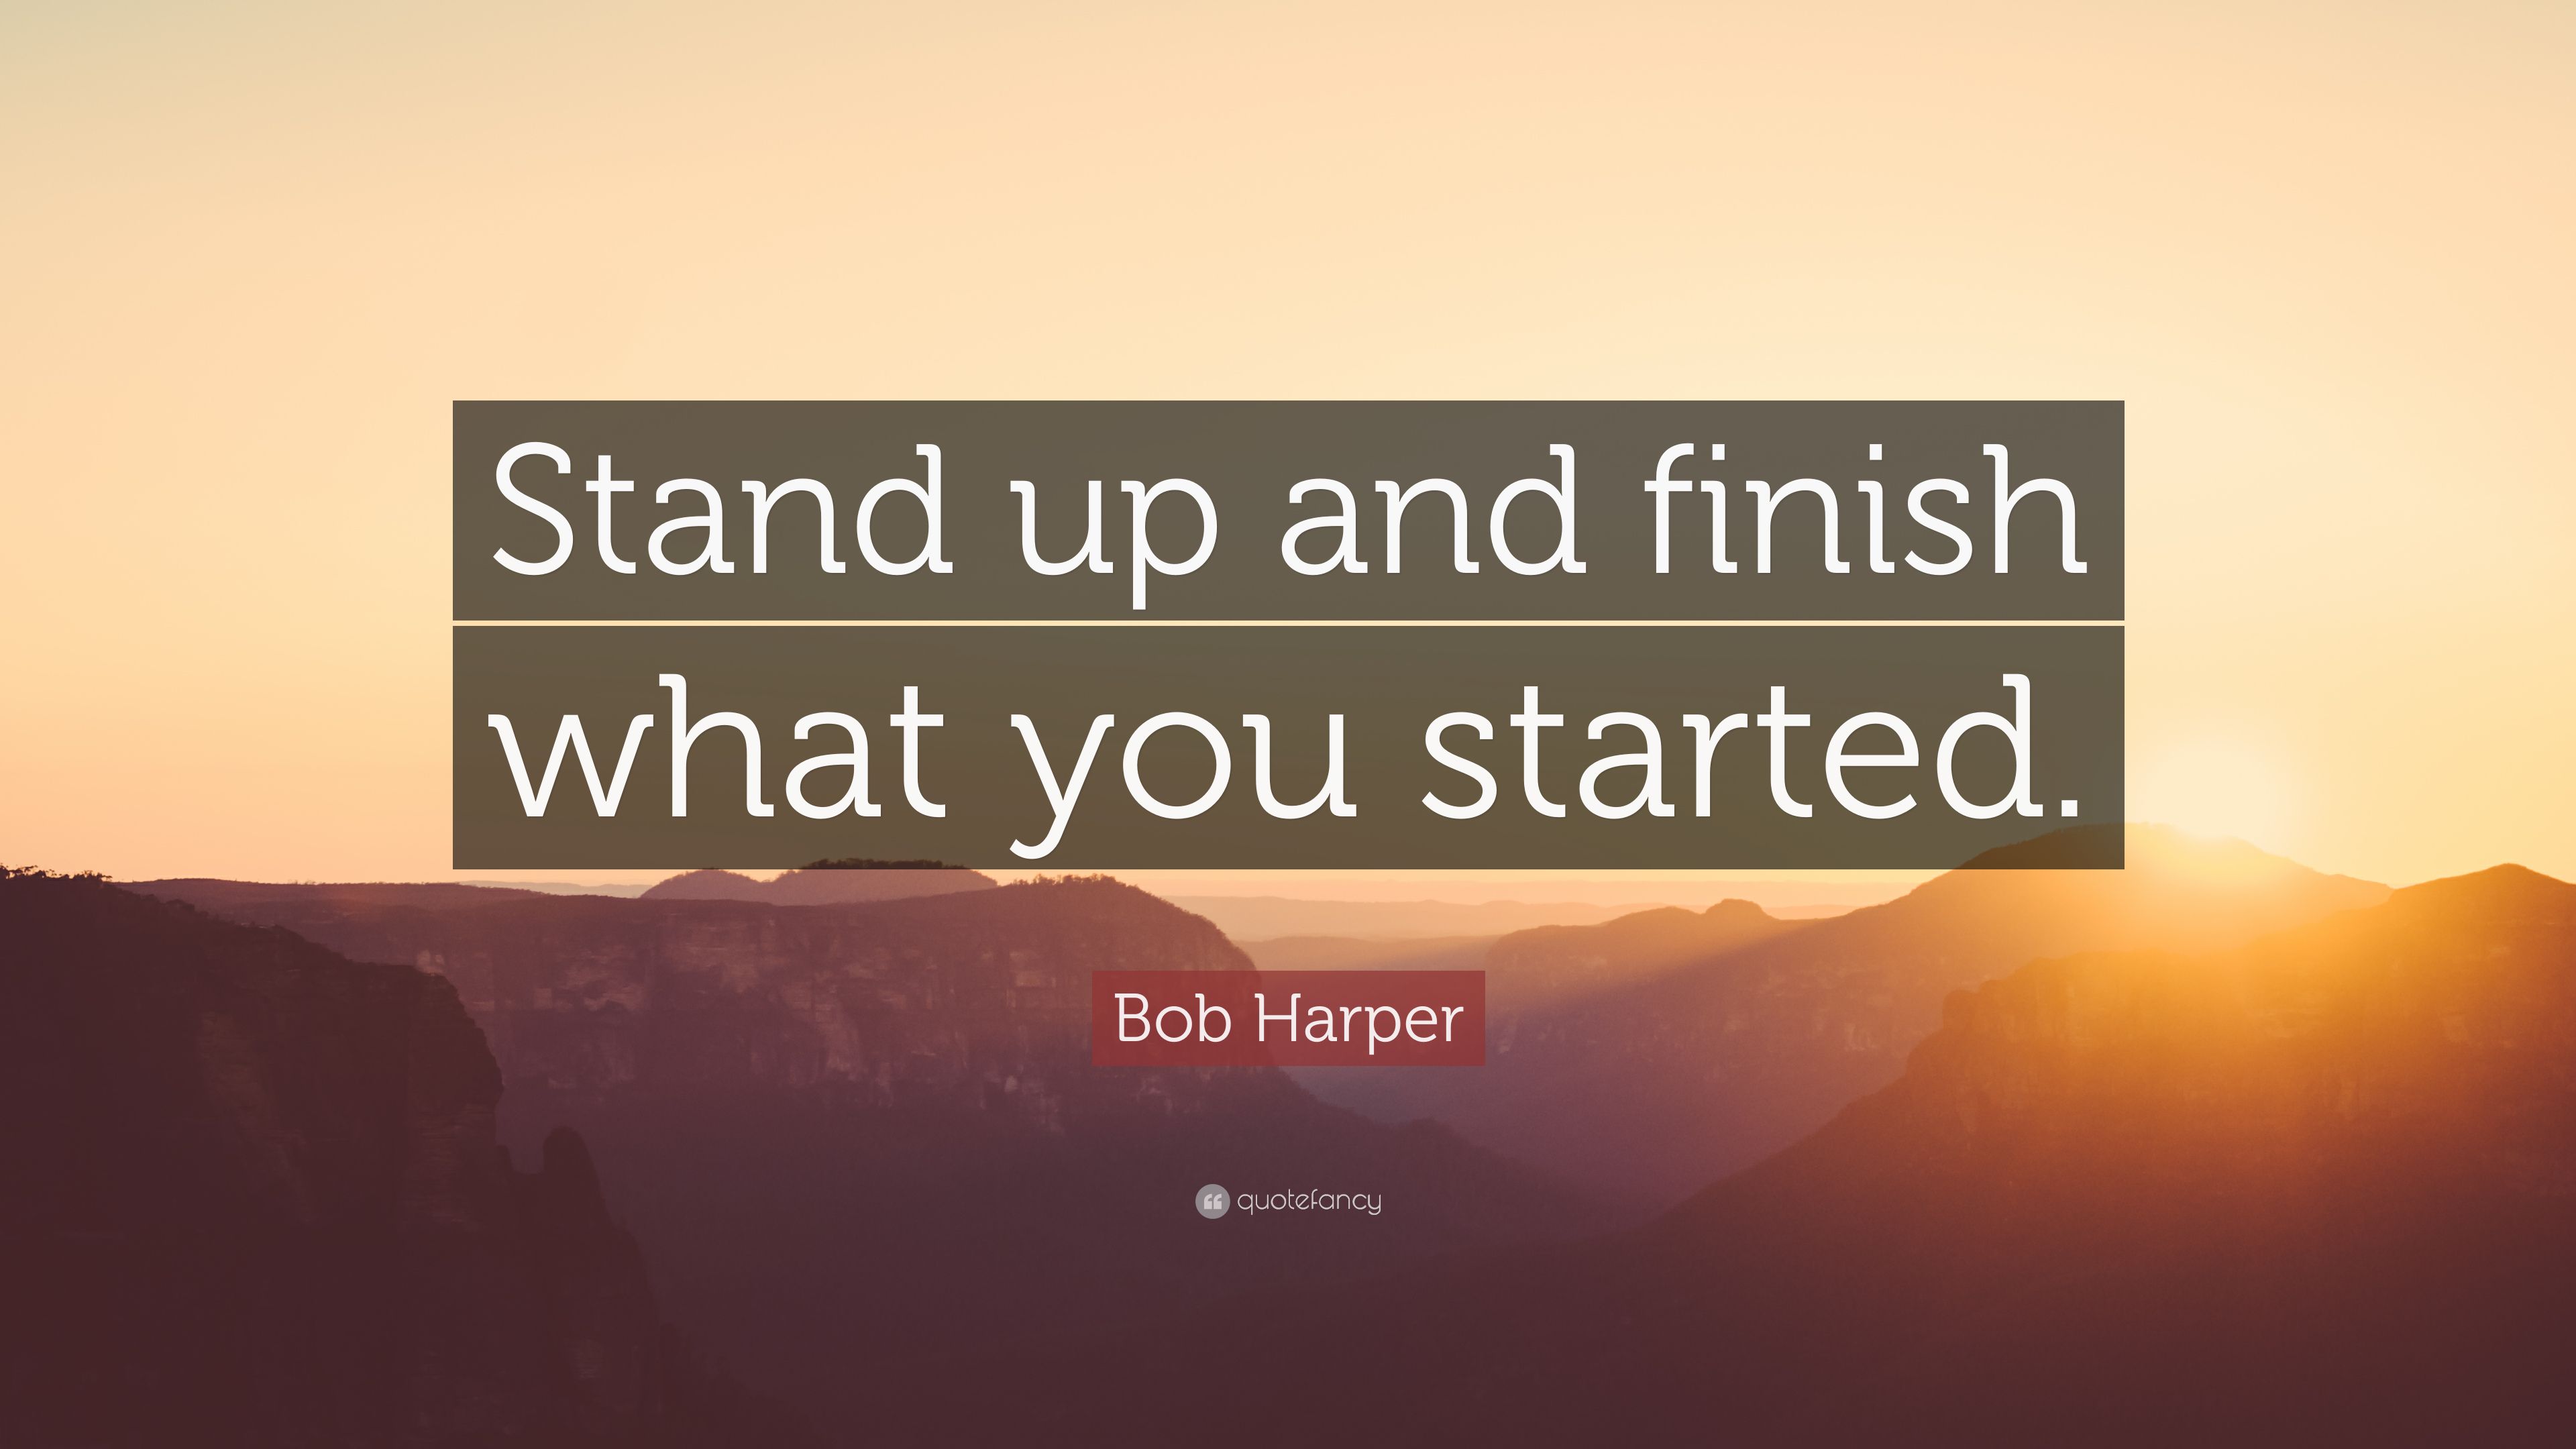 Bob Harper Quote: "Stand up and finish what you started. 